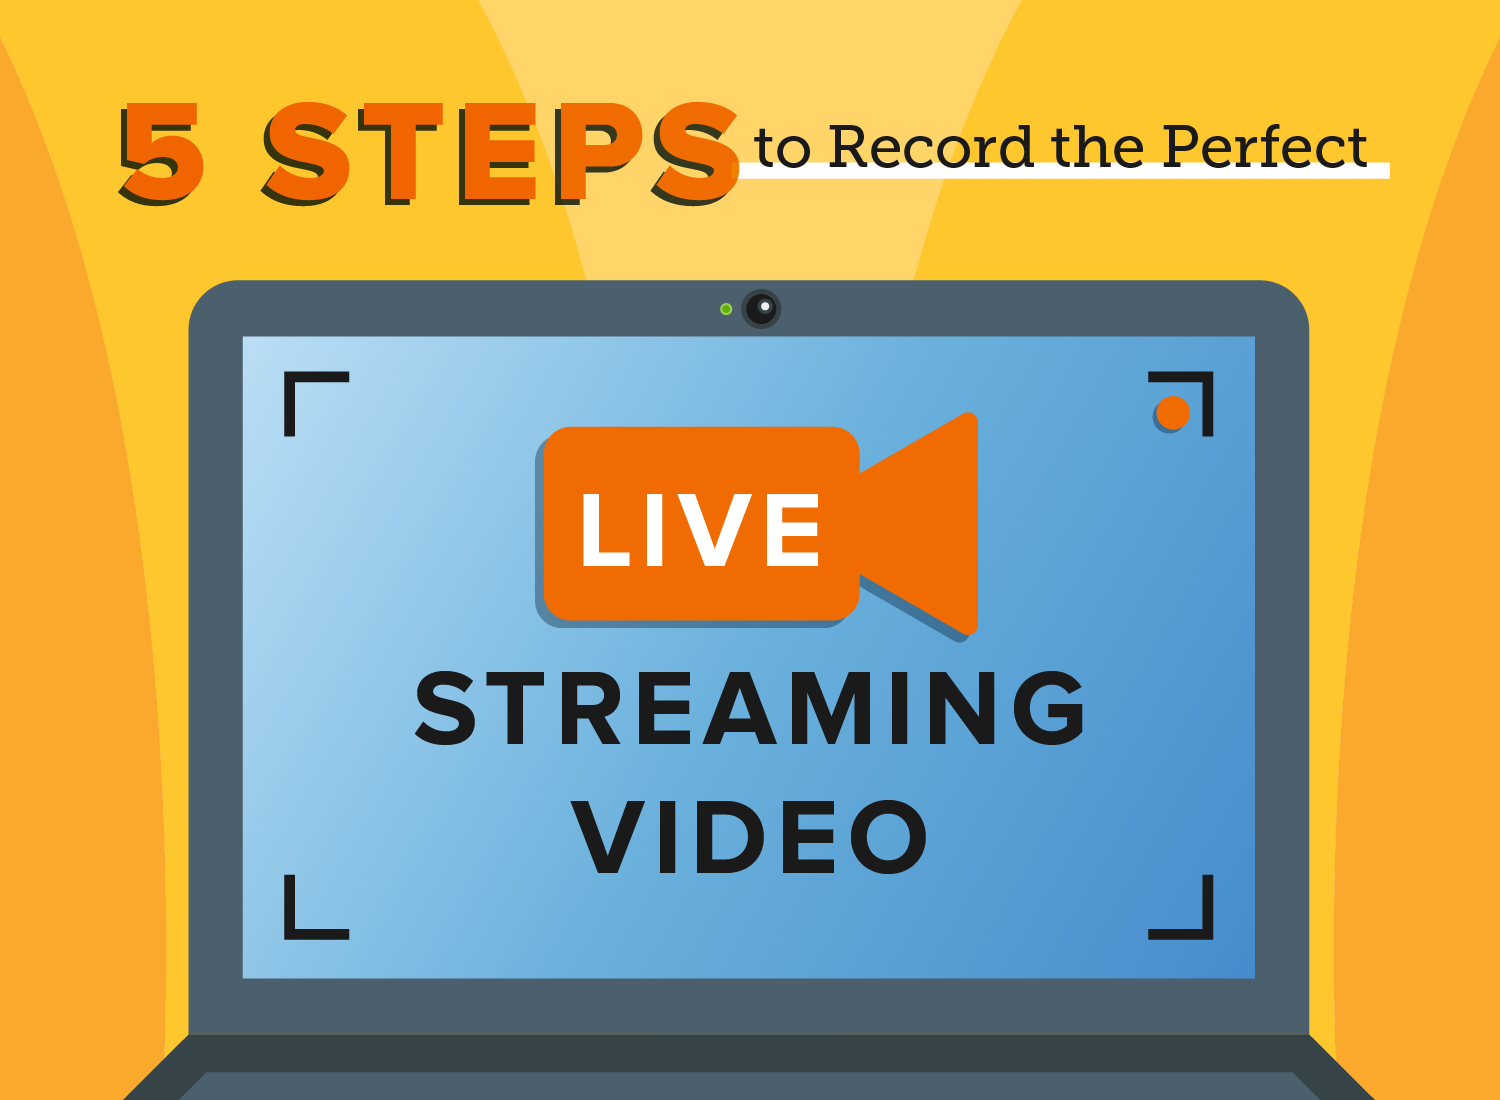 How to Record a Live Stream on Windows 10?